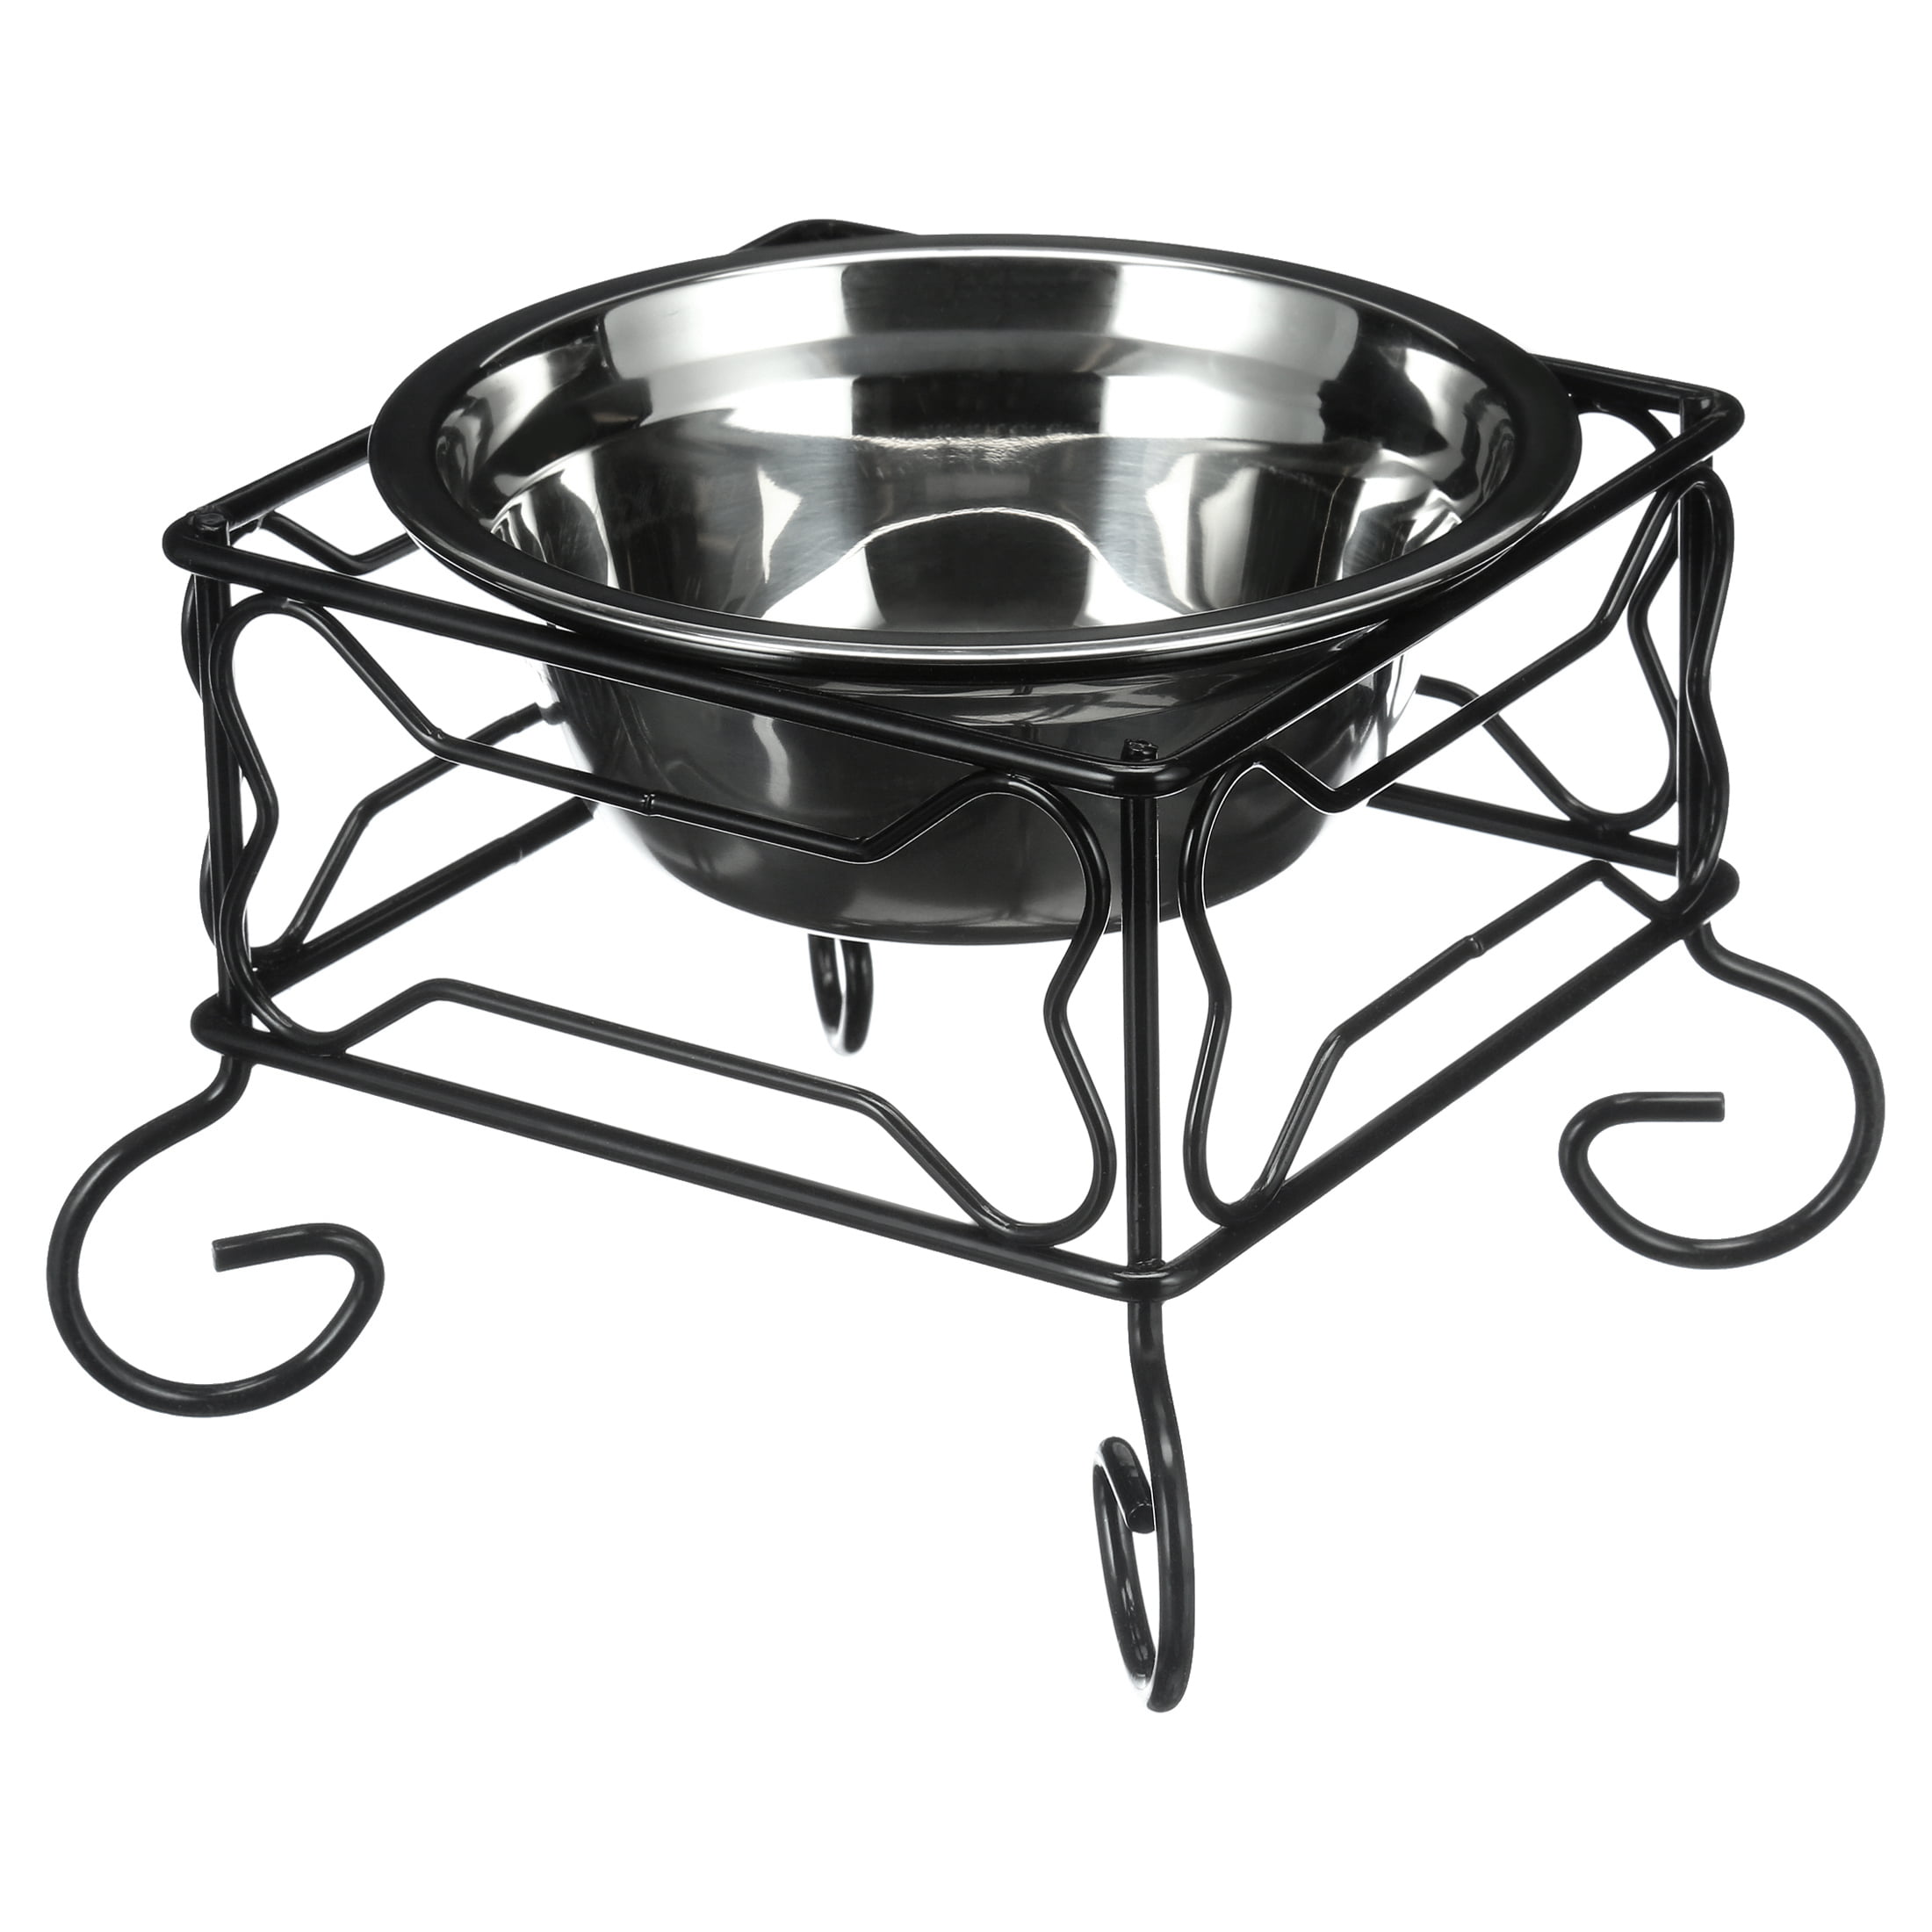 Mcage Wrought Iron Hi-Rise Stand with Single Stainless Steel Feeder Deep Bowl #90424 